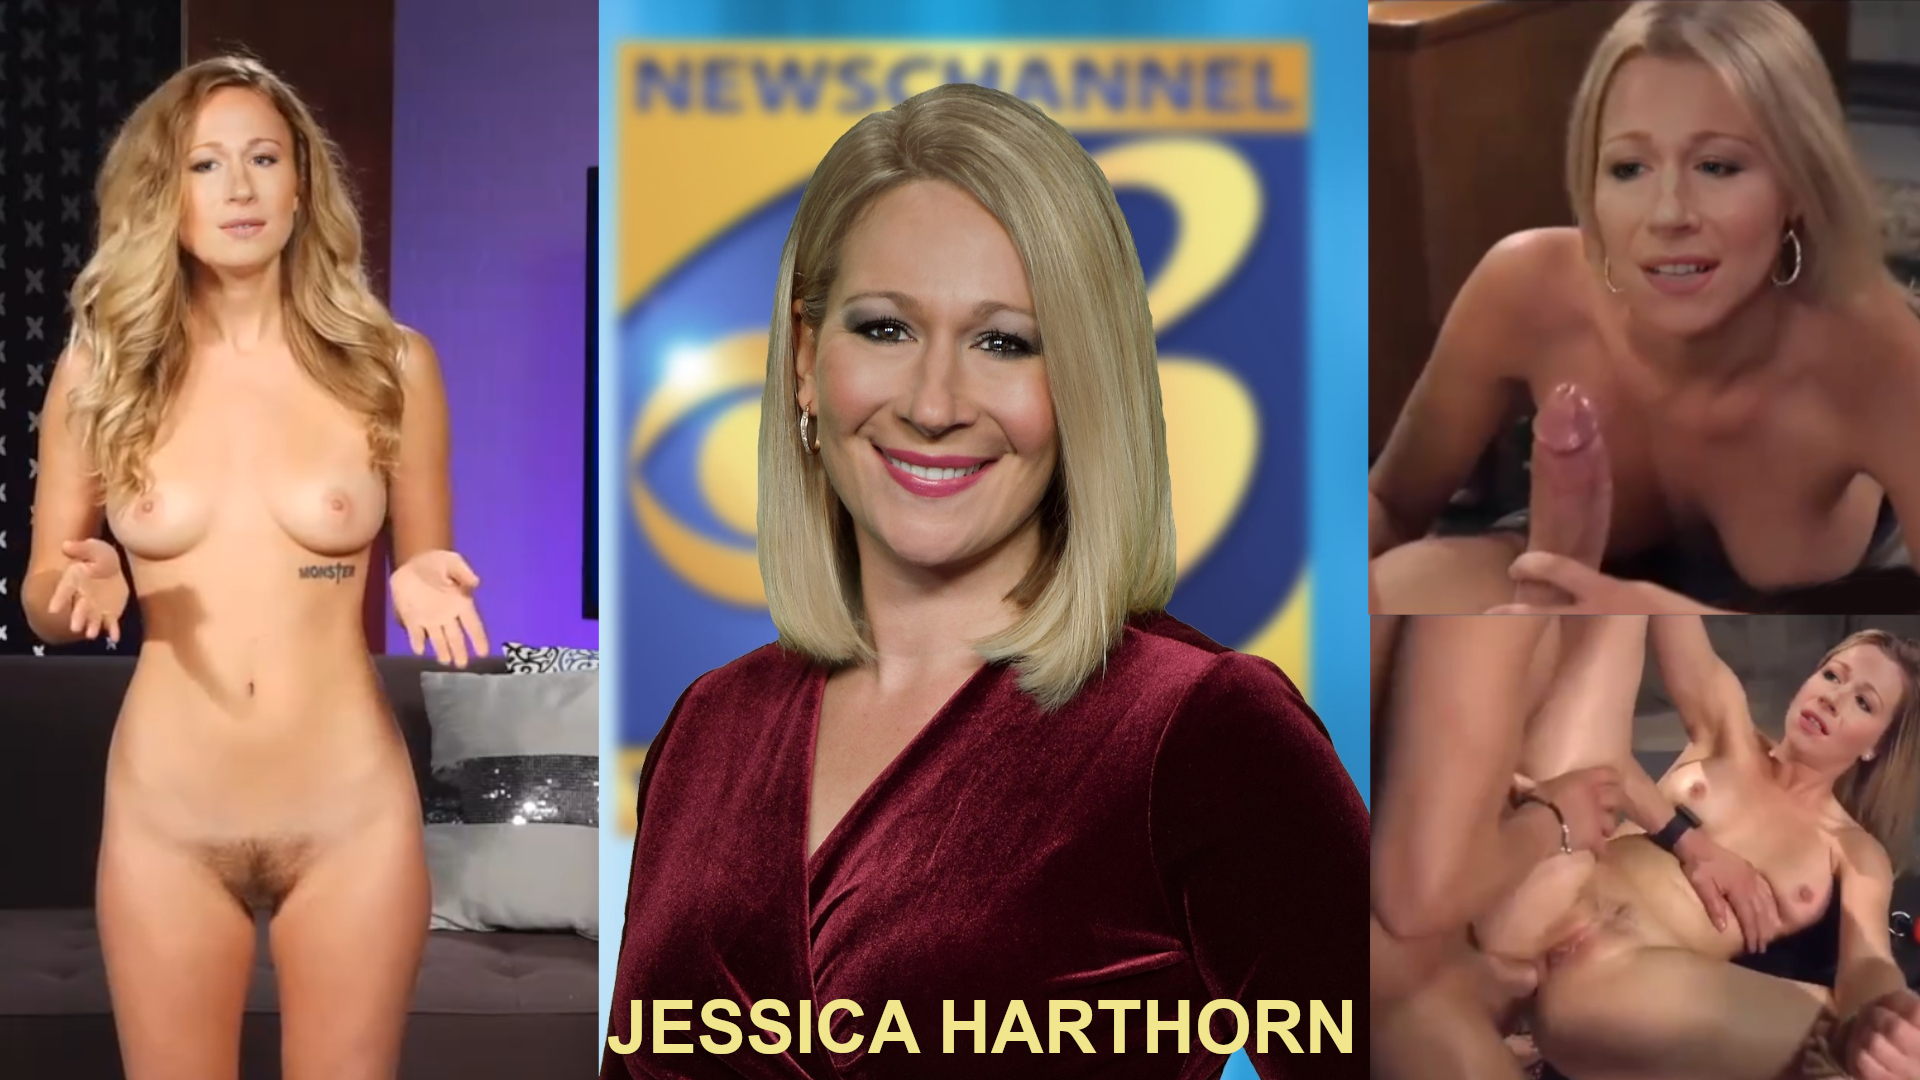 FAKE Local News Anchor Jessica Harthorn EXCLUSIVES!